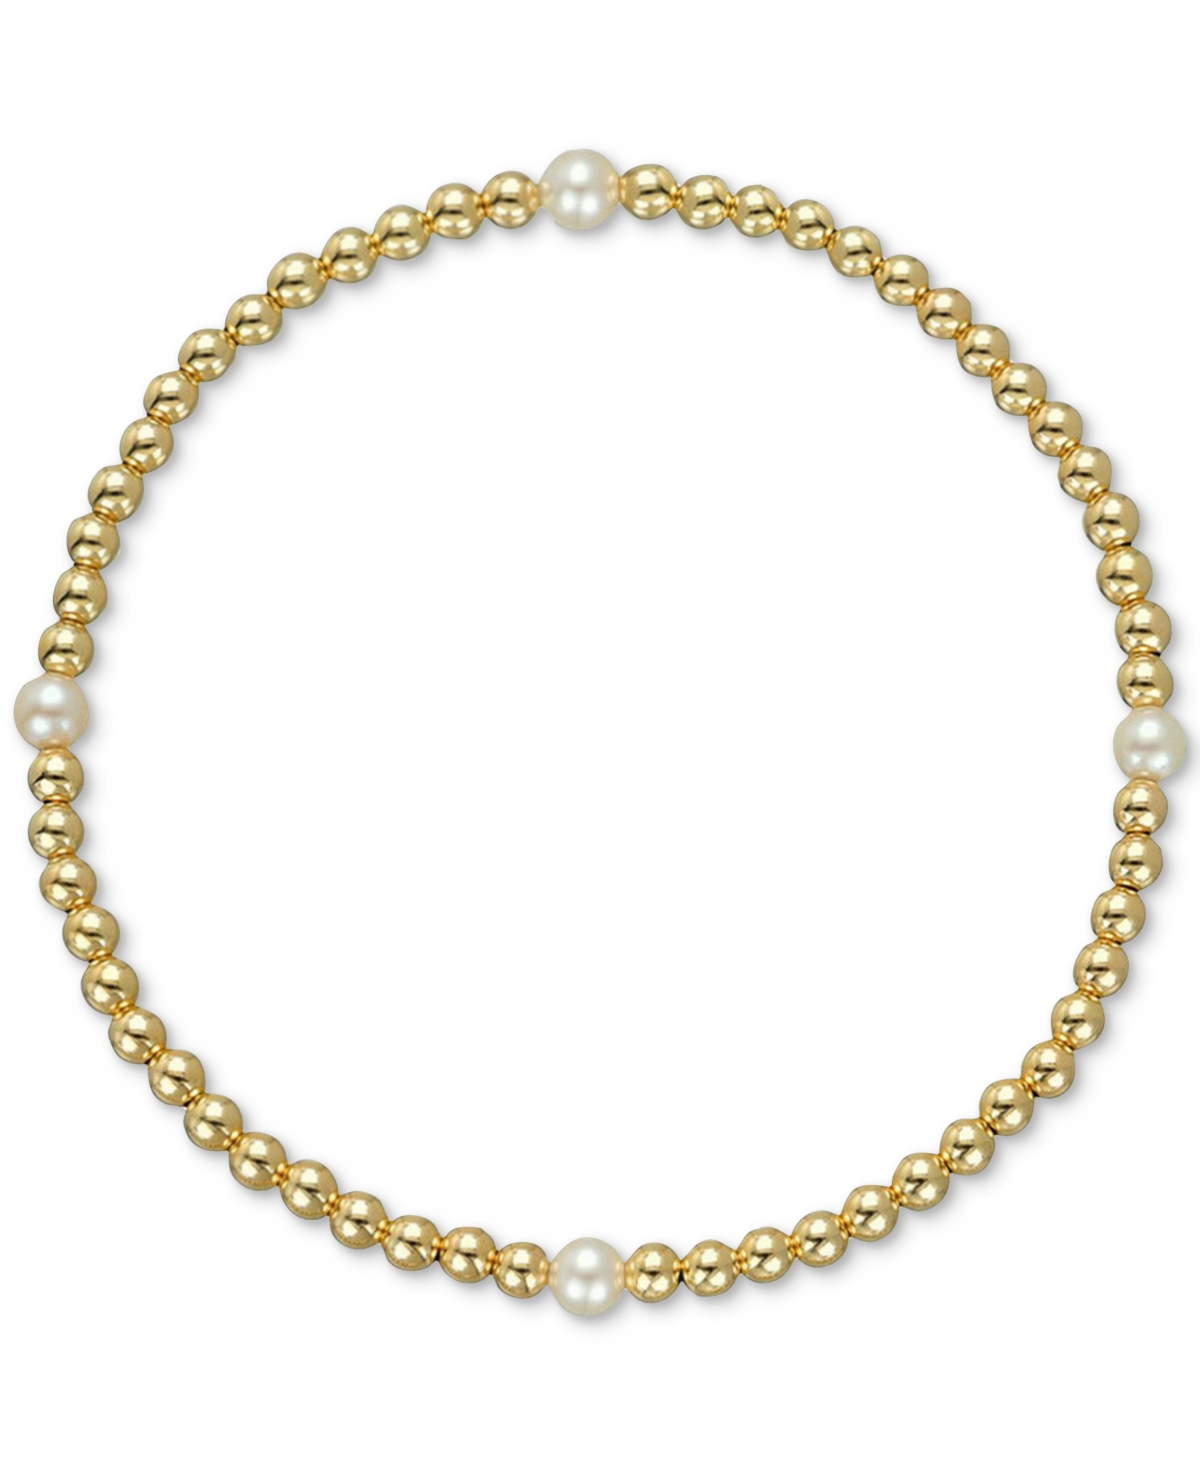 Zoe Lev 14k Yellow Gold Cultured Freshwater Pearl Station Beaded Stretch Bracelet